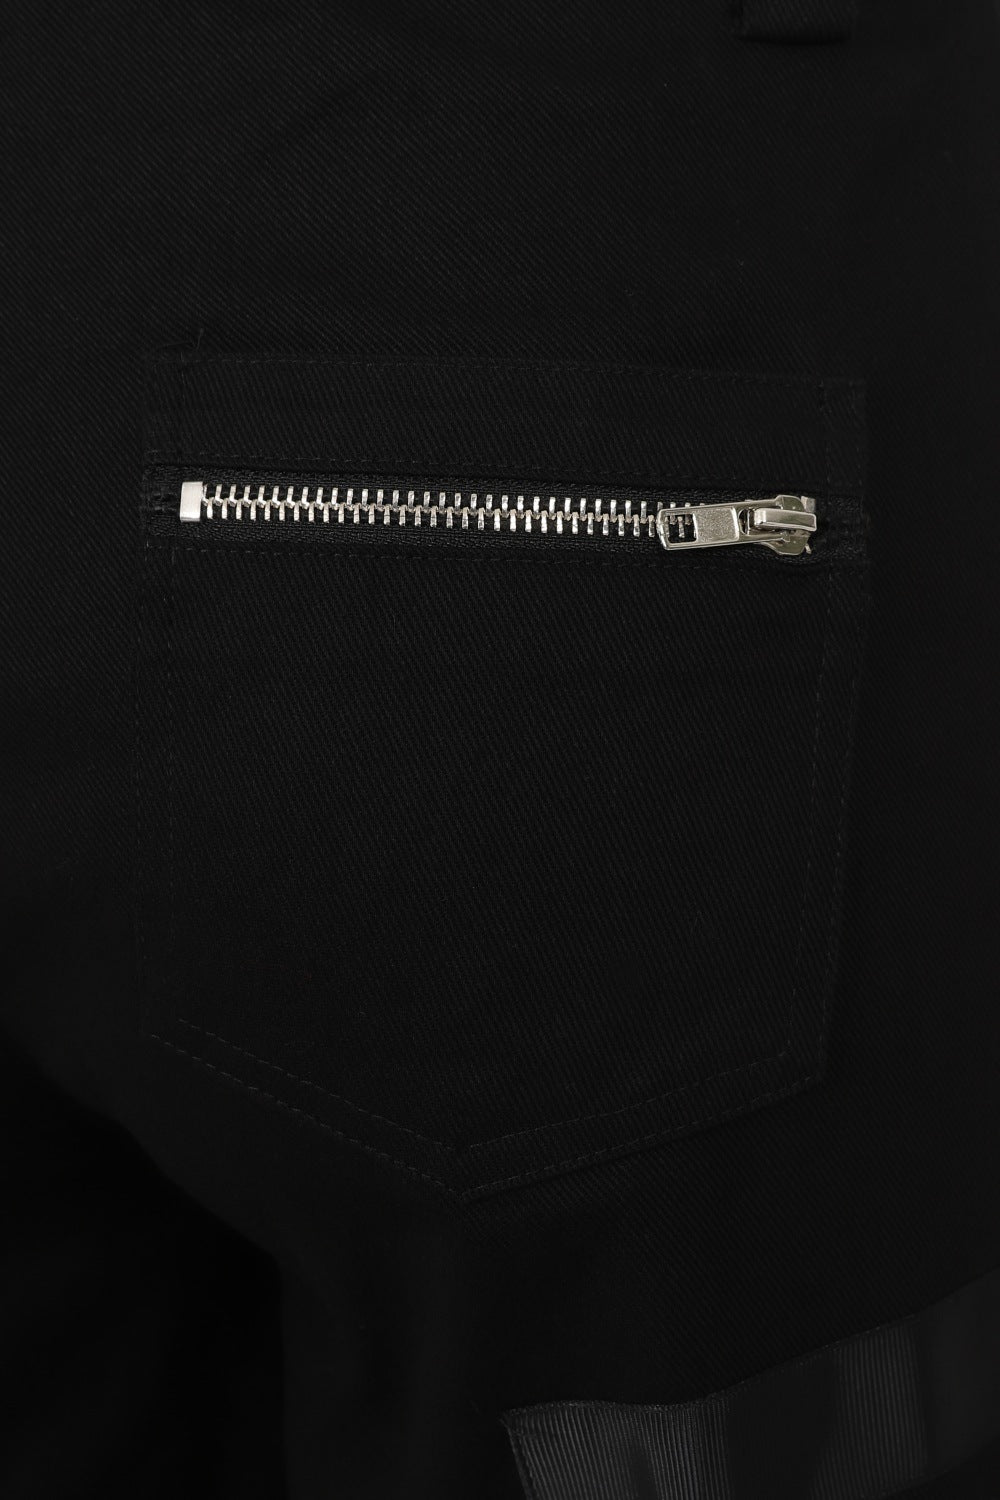 Baggy black trousers with zip and buckle features